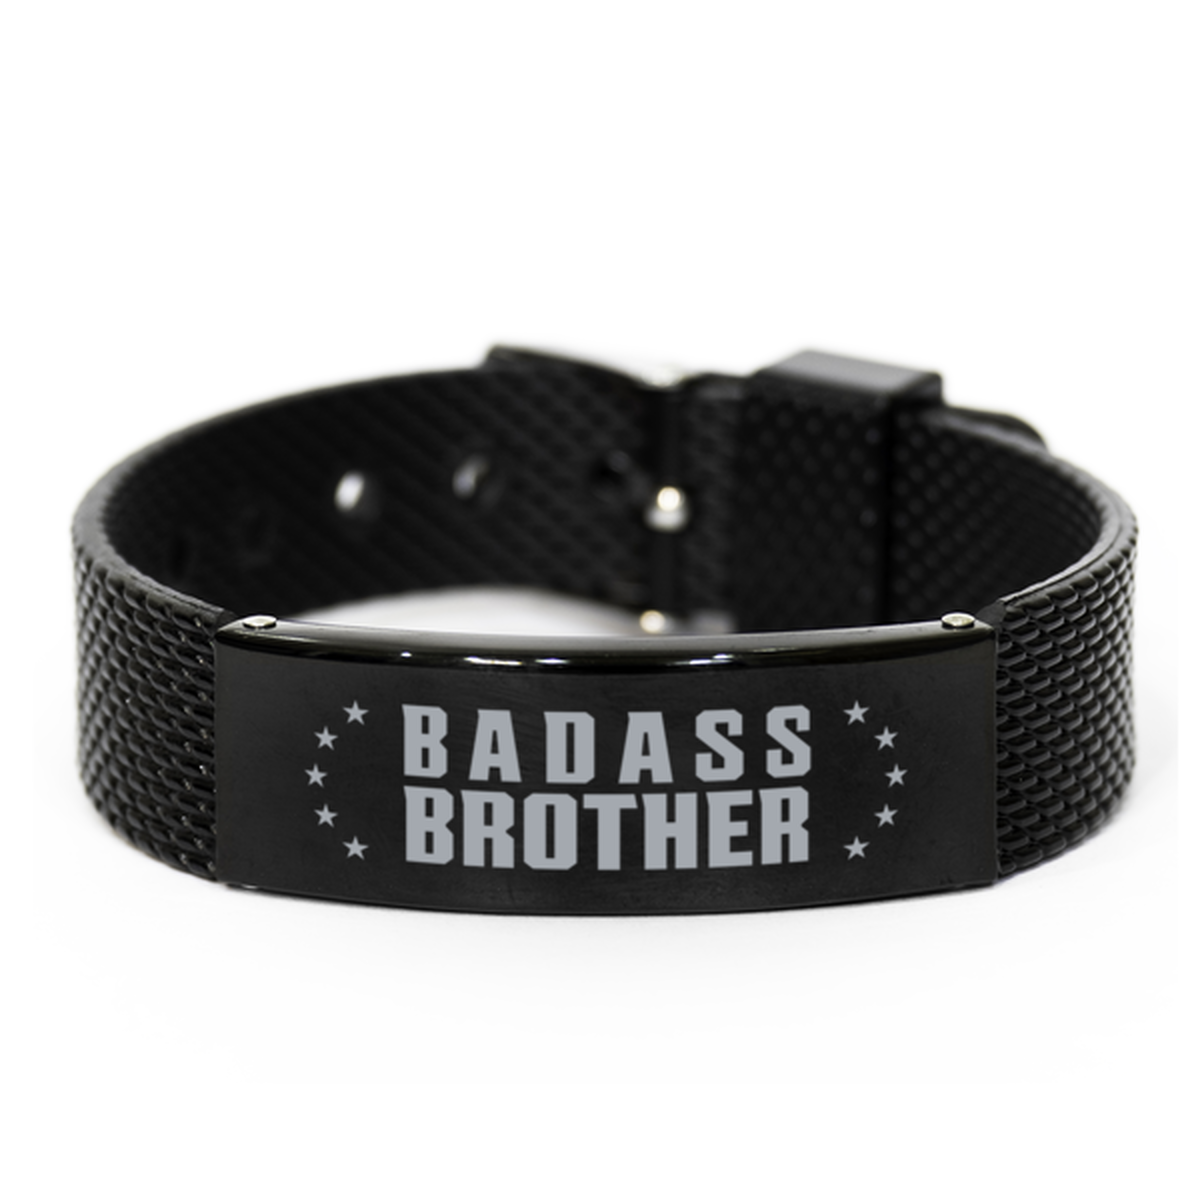 Brother Black Shark Mesh Bracelet, Badass Brother, Funny Family Gifts For Brother From Brother Sister